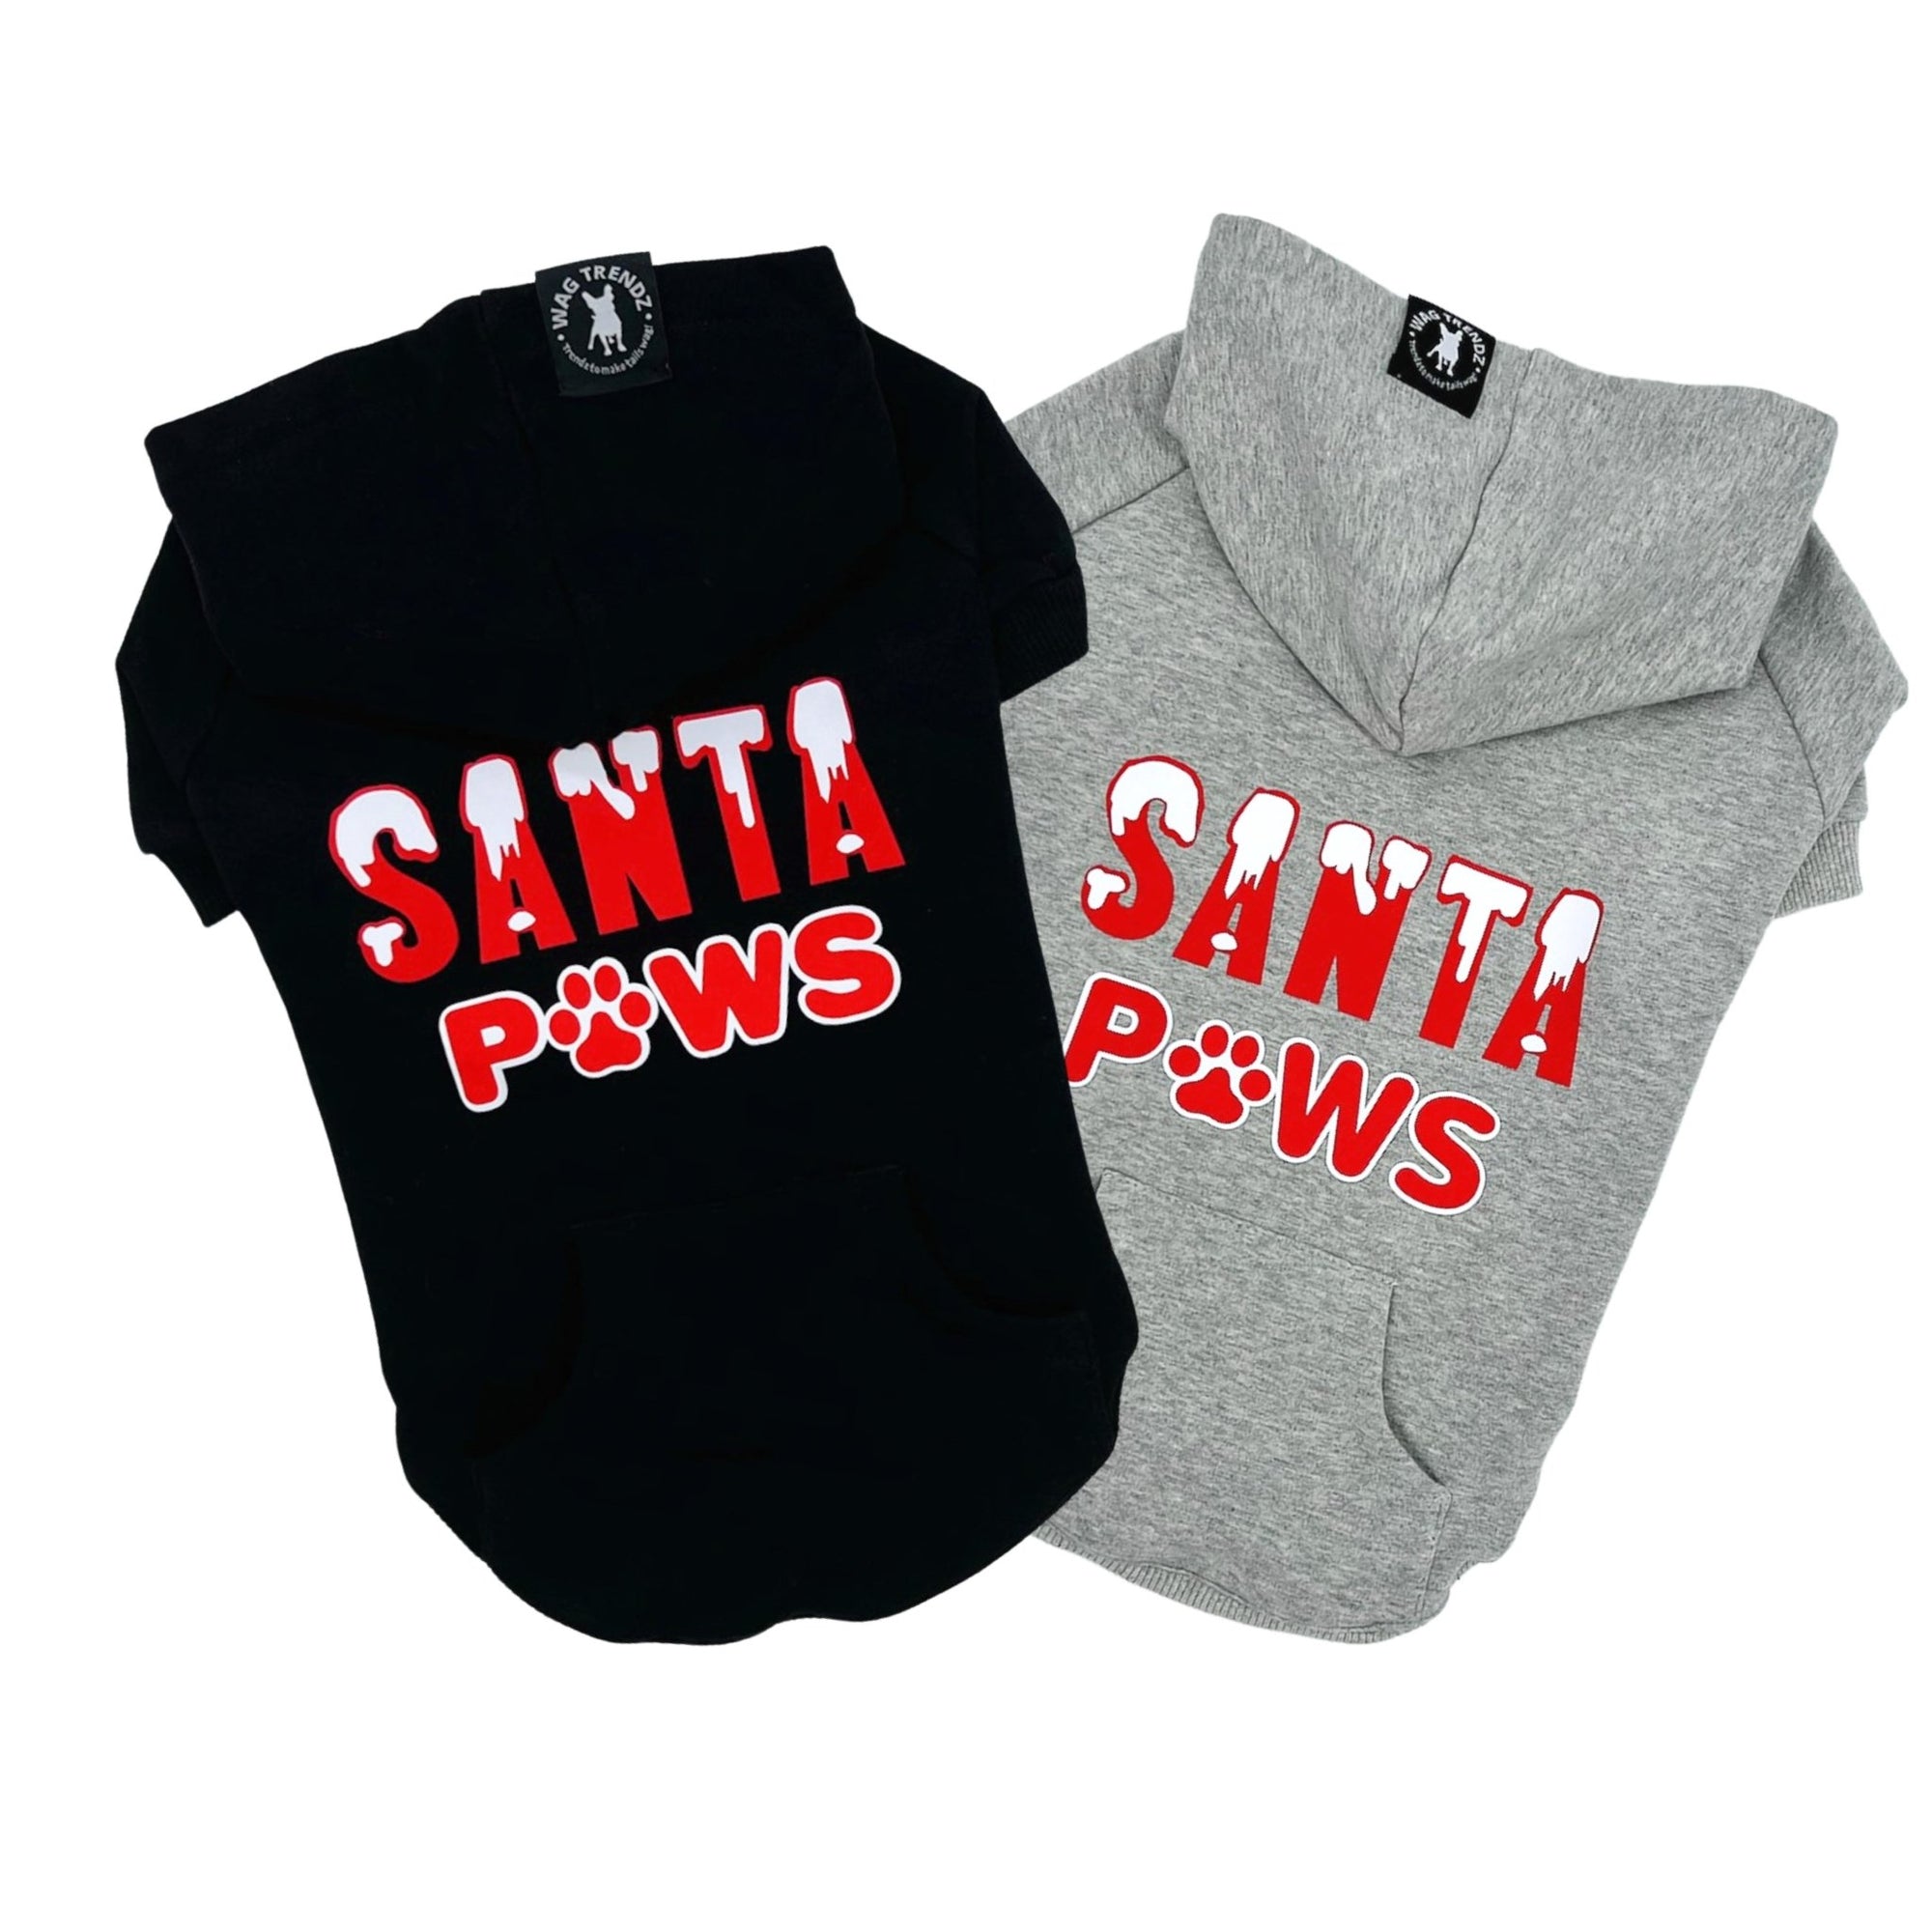 Dog Hoodie - Hoodies For Dogs - &quot;Santa Paws&quot; dog hoodies in black and gray - back view is snow capped red and white SANTA letters with paws in red and white spelled with a paw - against solid white background - Wag Trendz